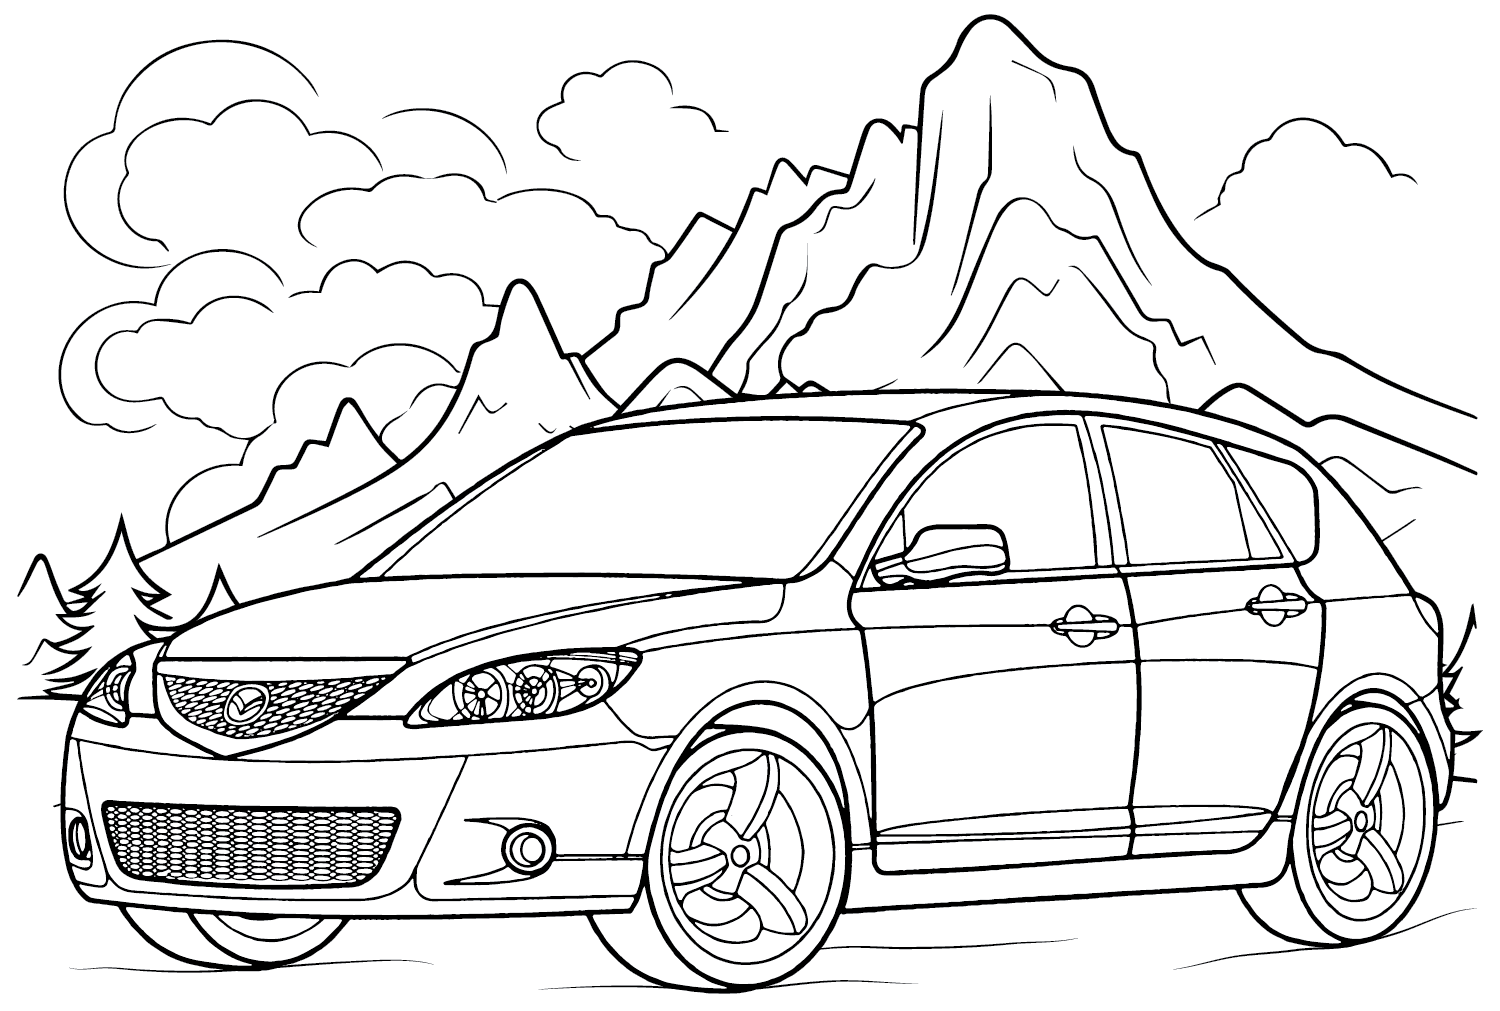 Mazda 3 Hatchback Coloring Page from Mazda